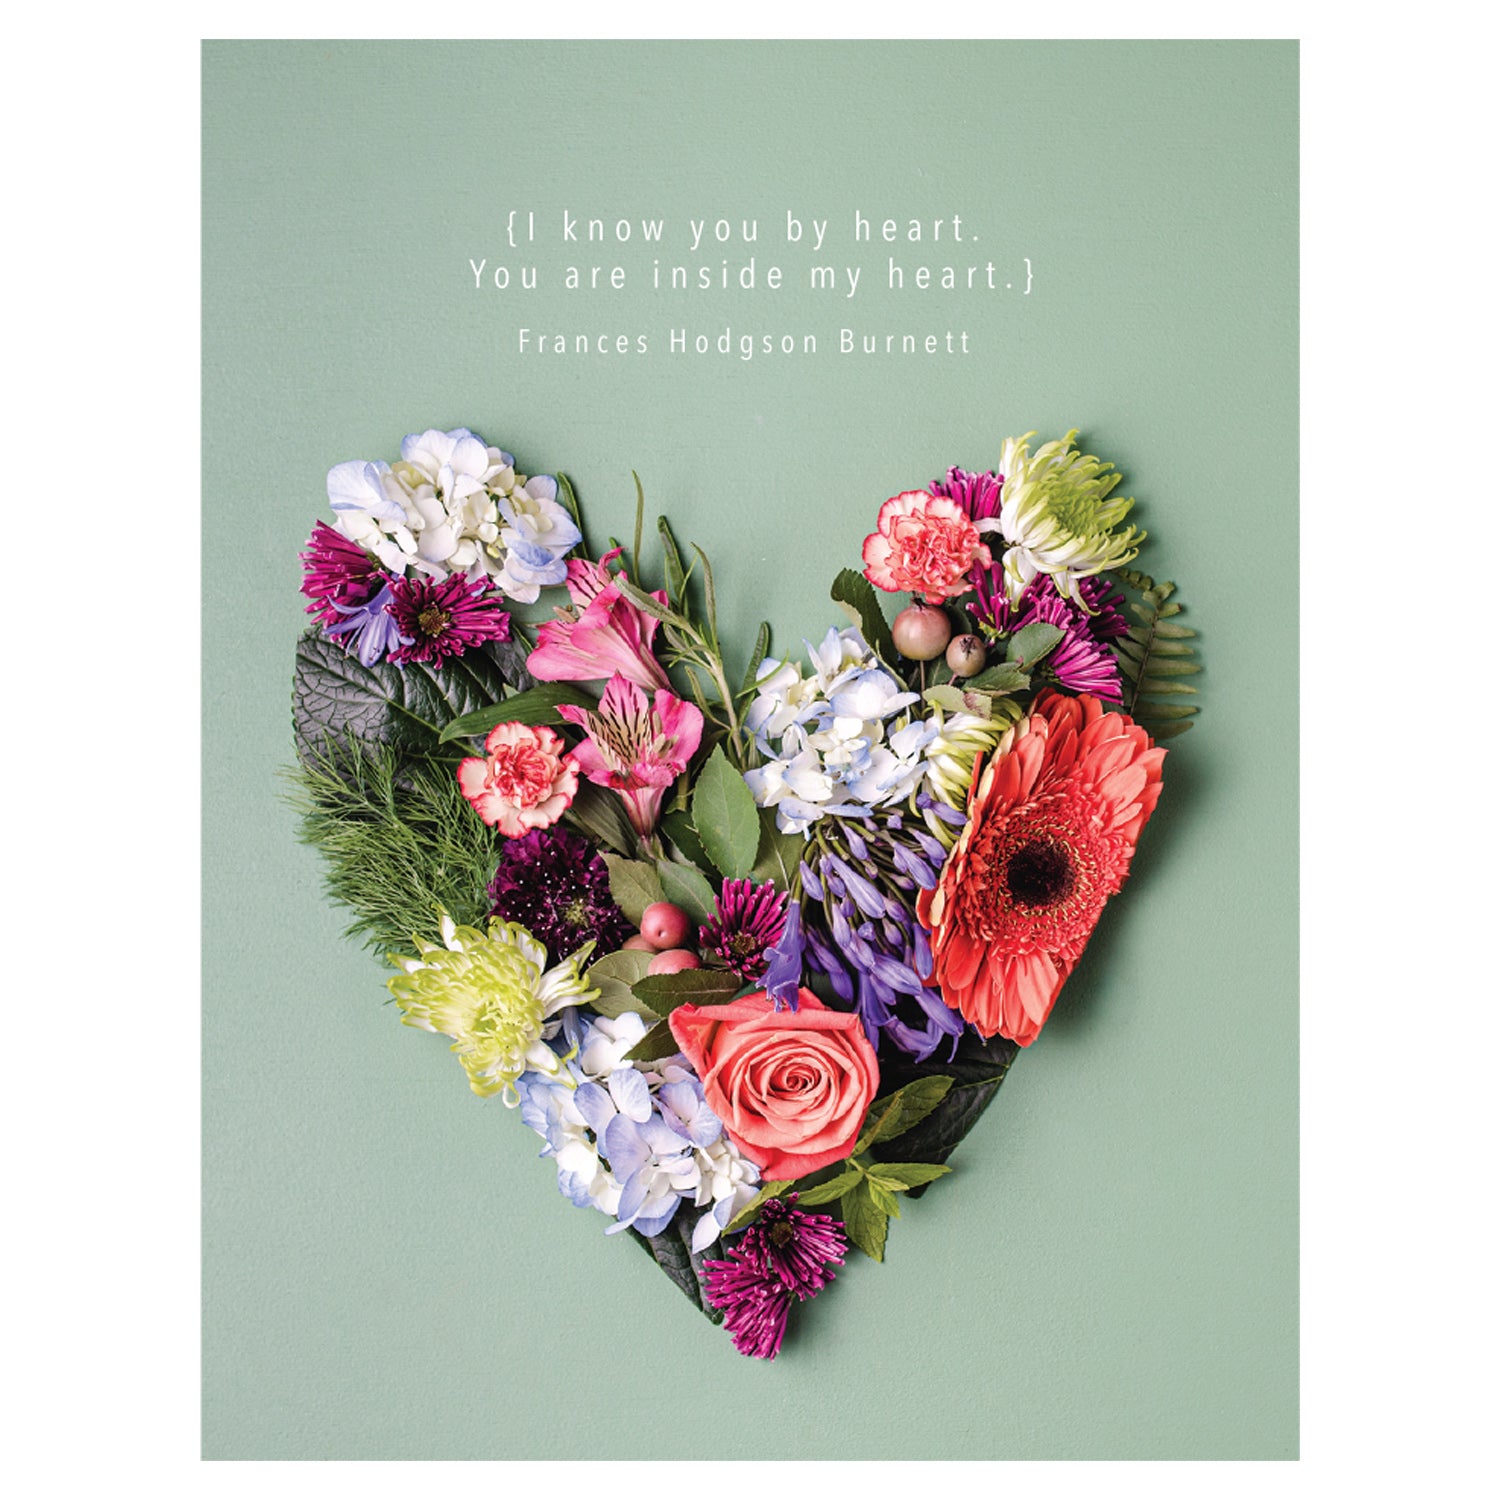 A photo of a heart-shaped arrangement of various colorful flowers on a sage green background with a romantic quote by Frances Hodgson Burnett at the top, printed on high quality uncoated stock.